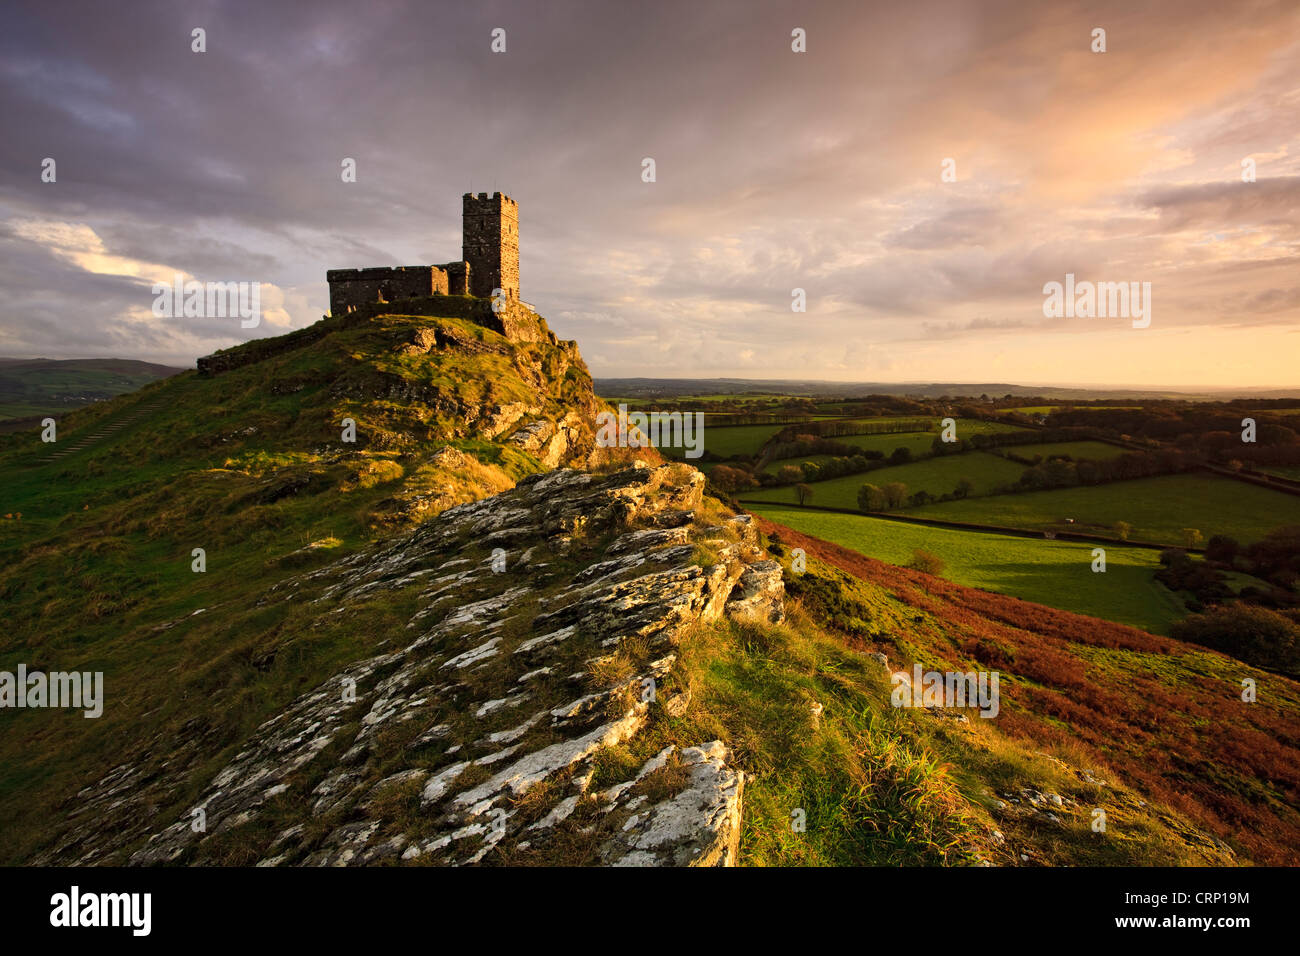 Evening light on the Church of St. Michael de Rupe (St. Michael of the Rock) in Dartmoor National Park. Stock Photo